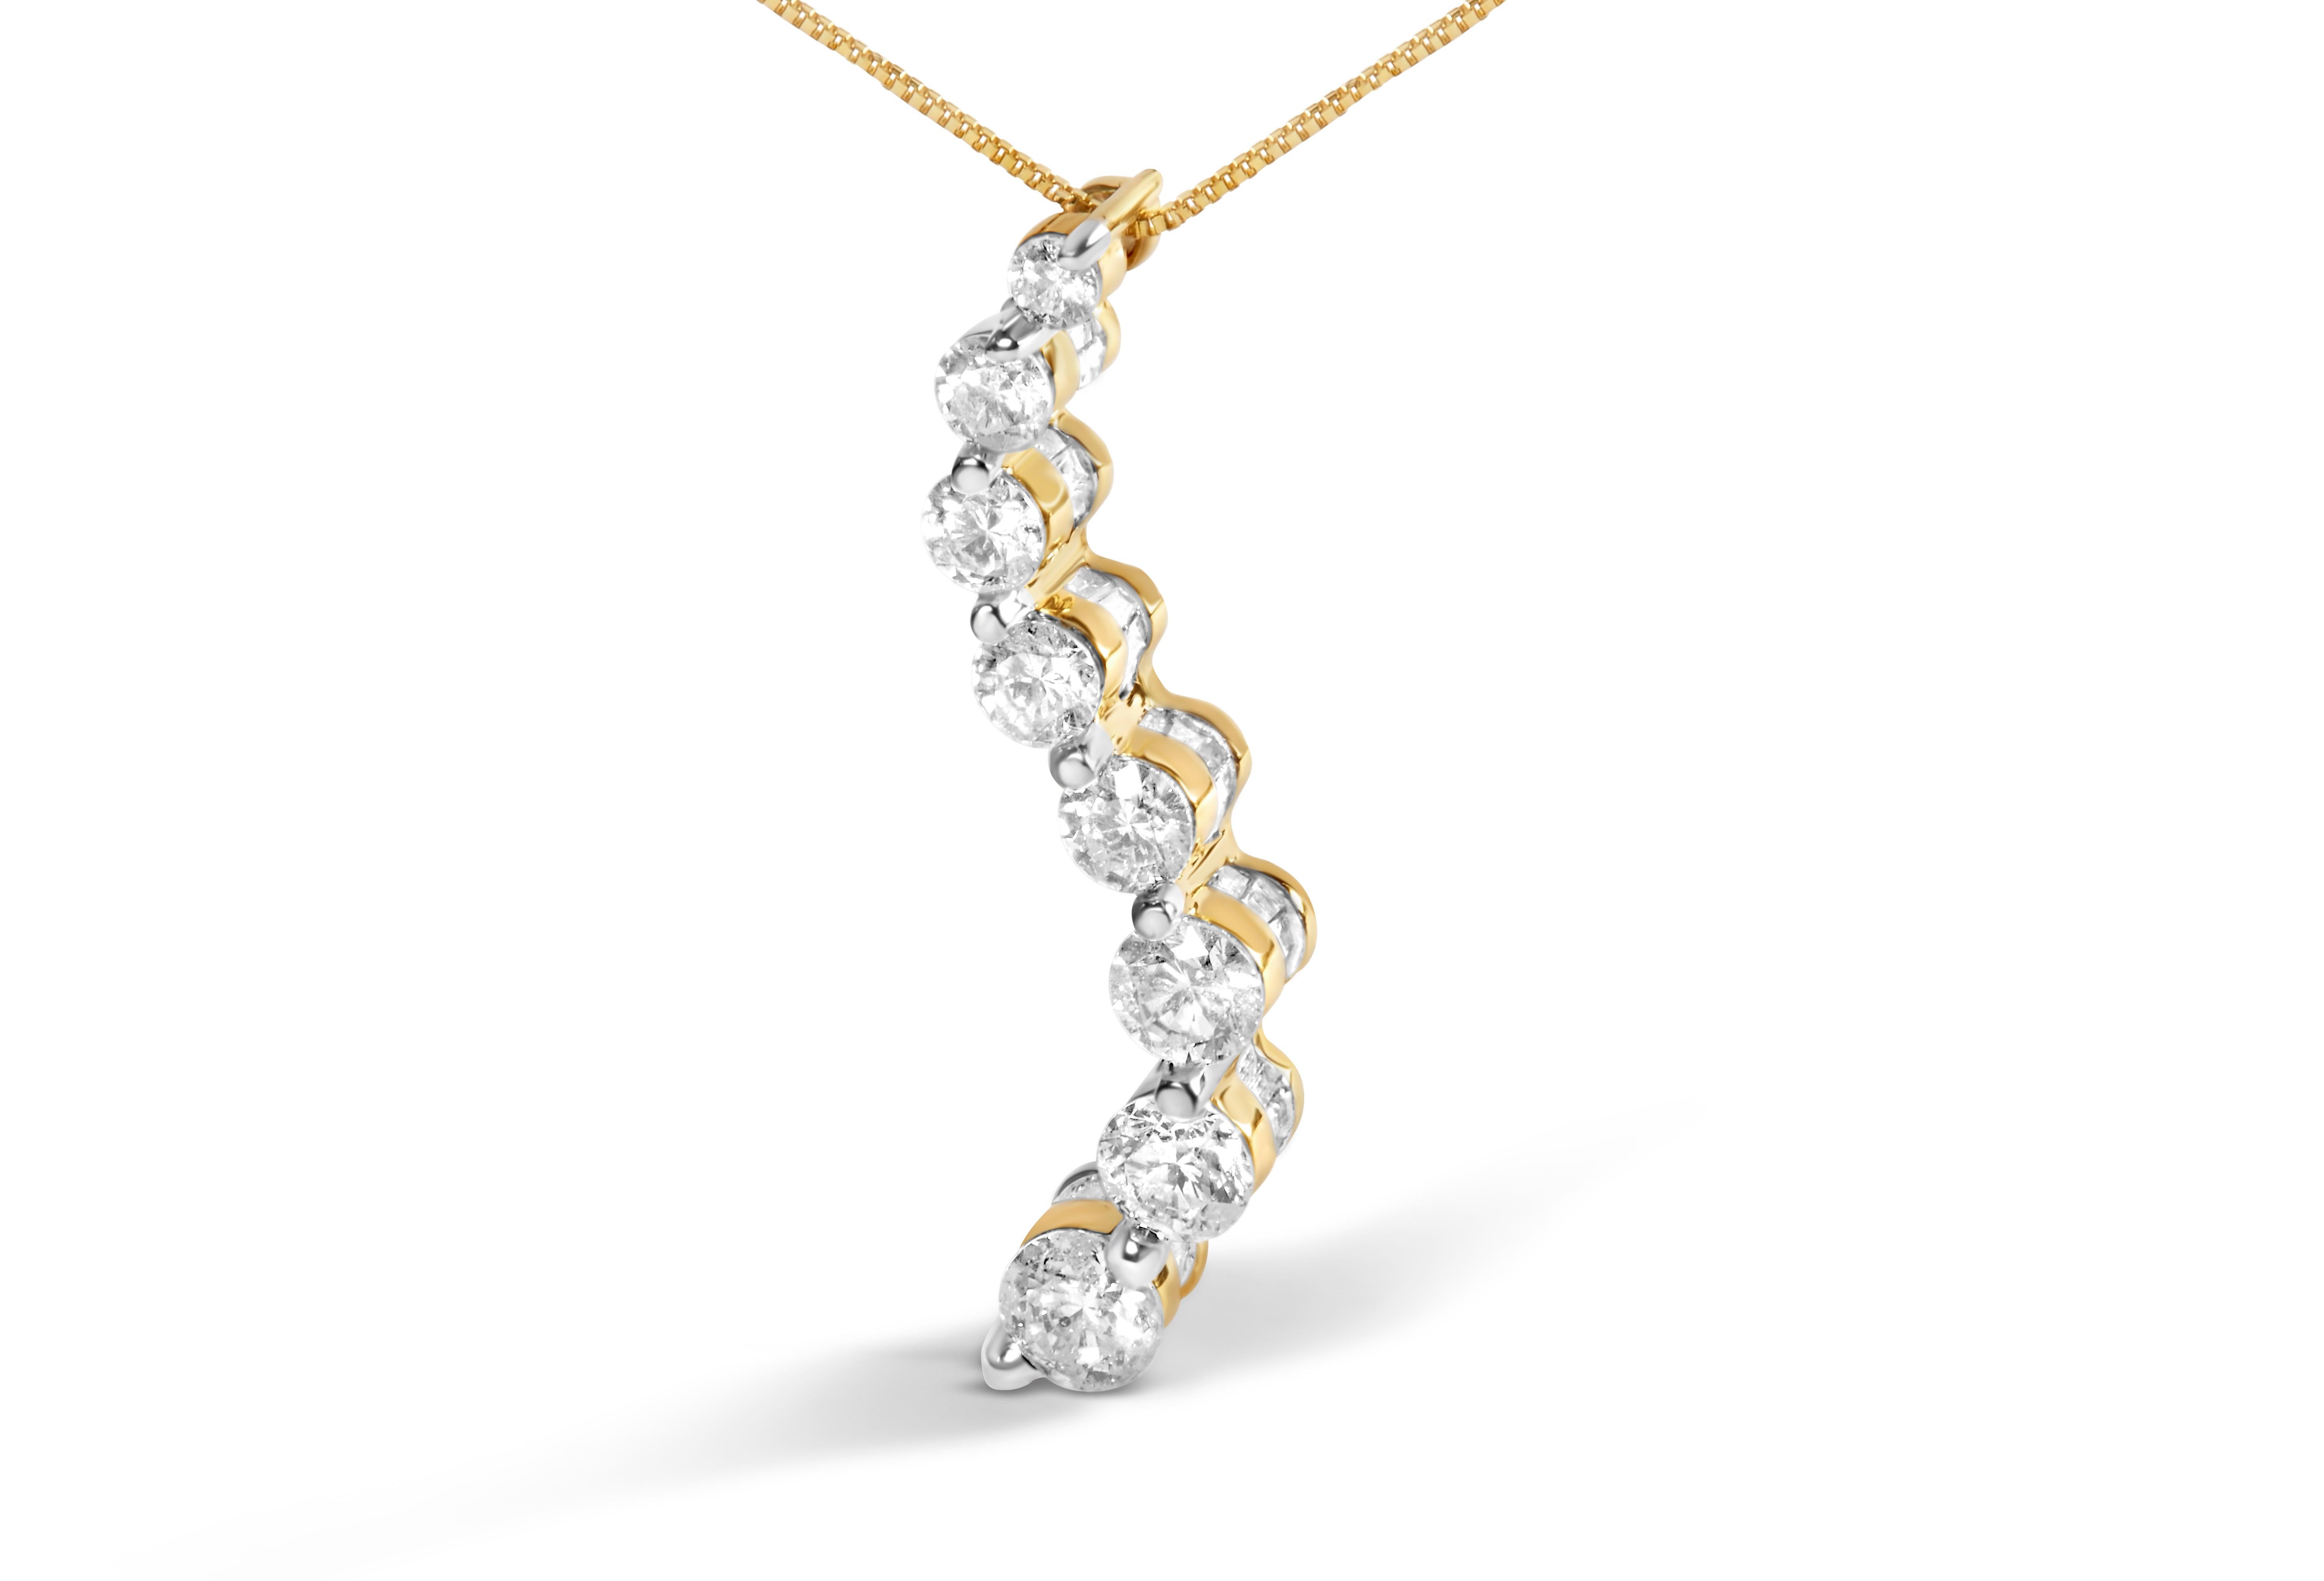 Introducing an AGS certified diamond pendant necklace, a piece of art that embodies the perfect journey of love. Crafted from luxurious 14K yellow gold, this necklace features a total of 62 natural diamonds, including 8 brilliant round-cut and 54